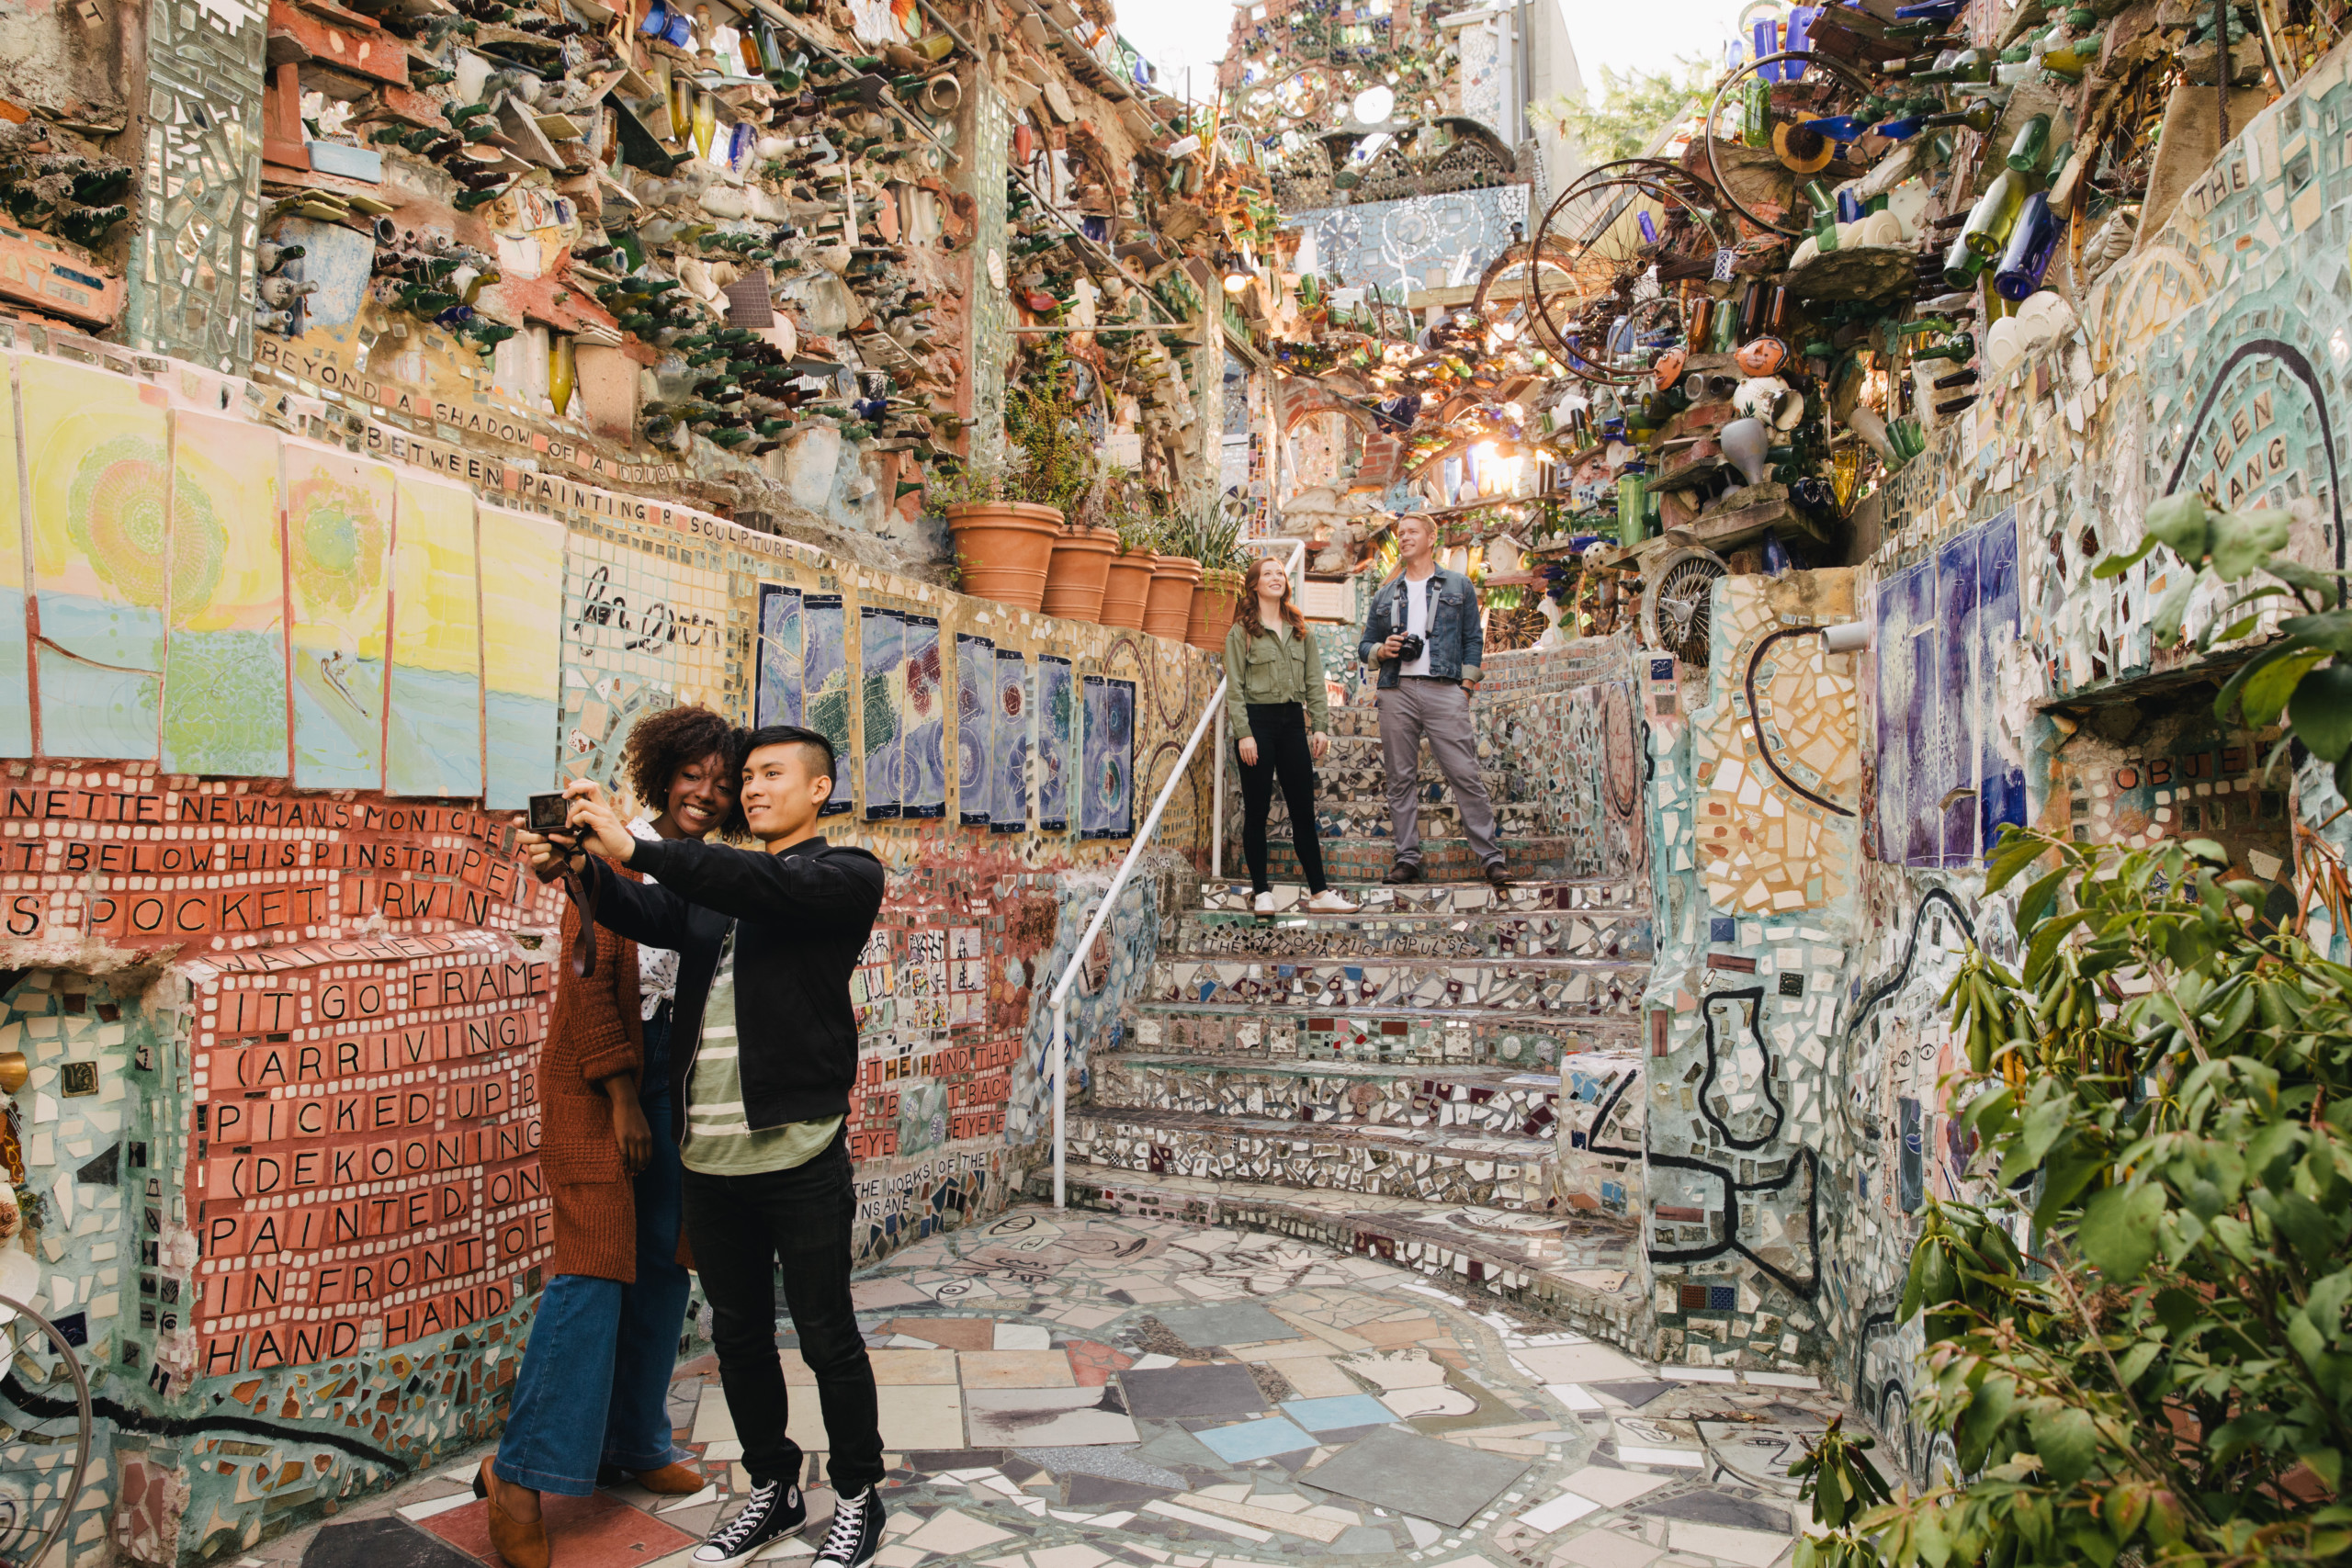 No better place to check out the alt-art scene in the city than the outdoor Magic Gardens. Courtesy of Philadelphia Convention and Visitors Bureau